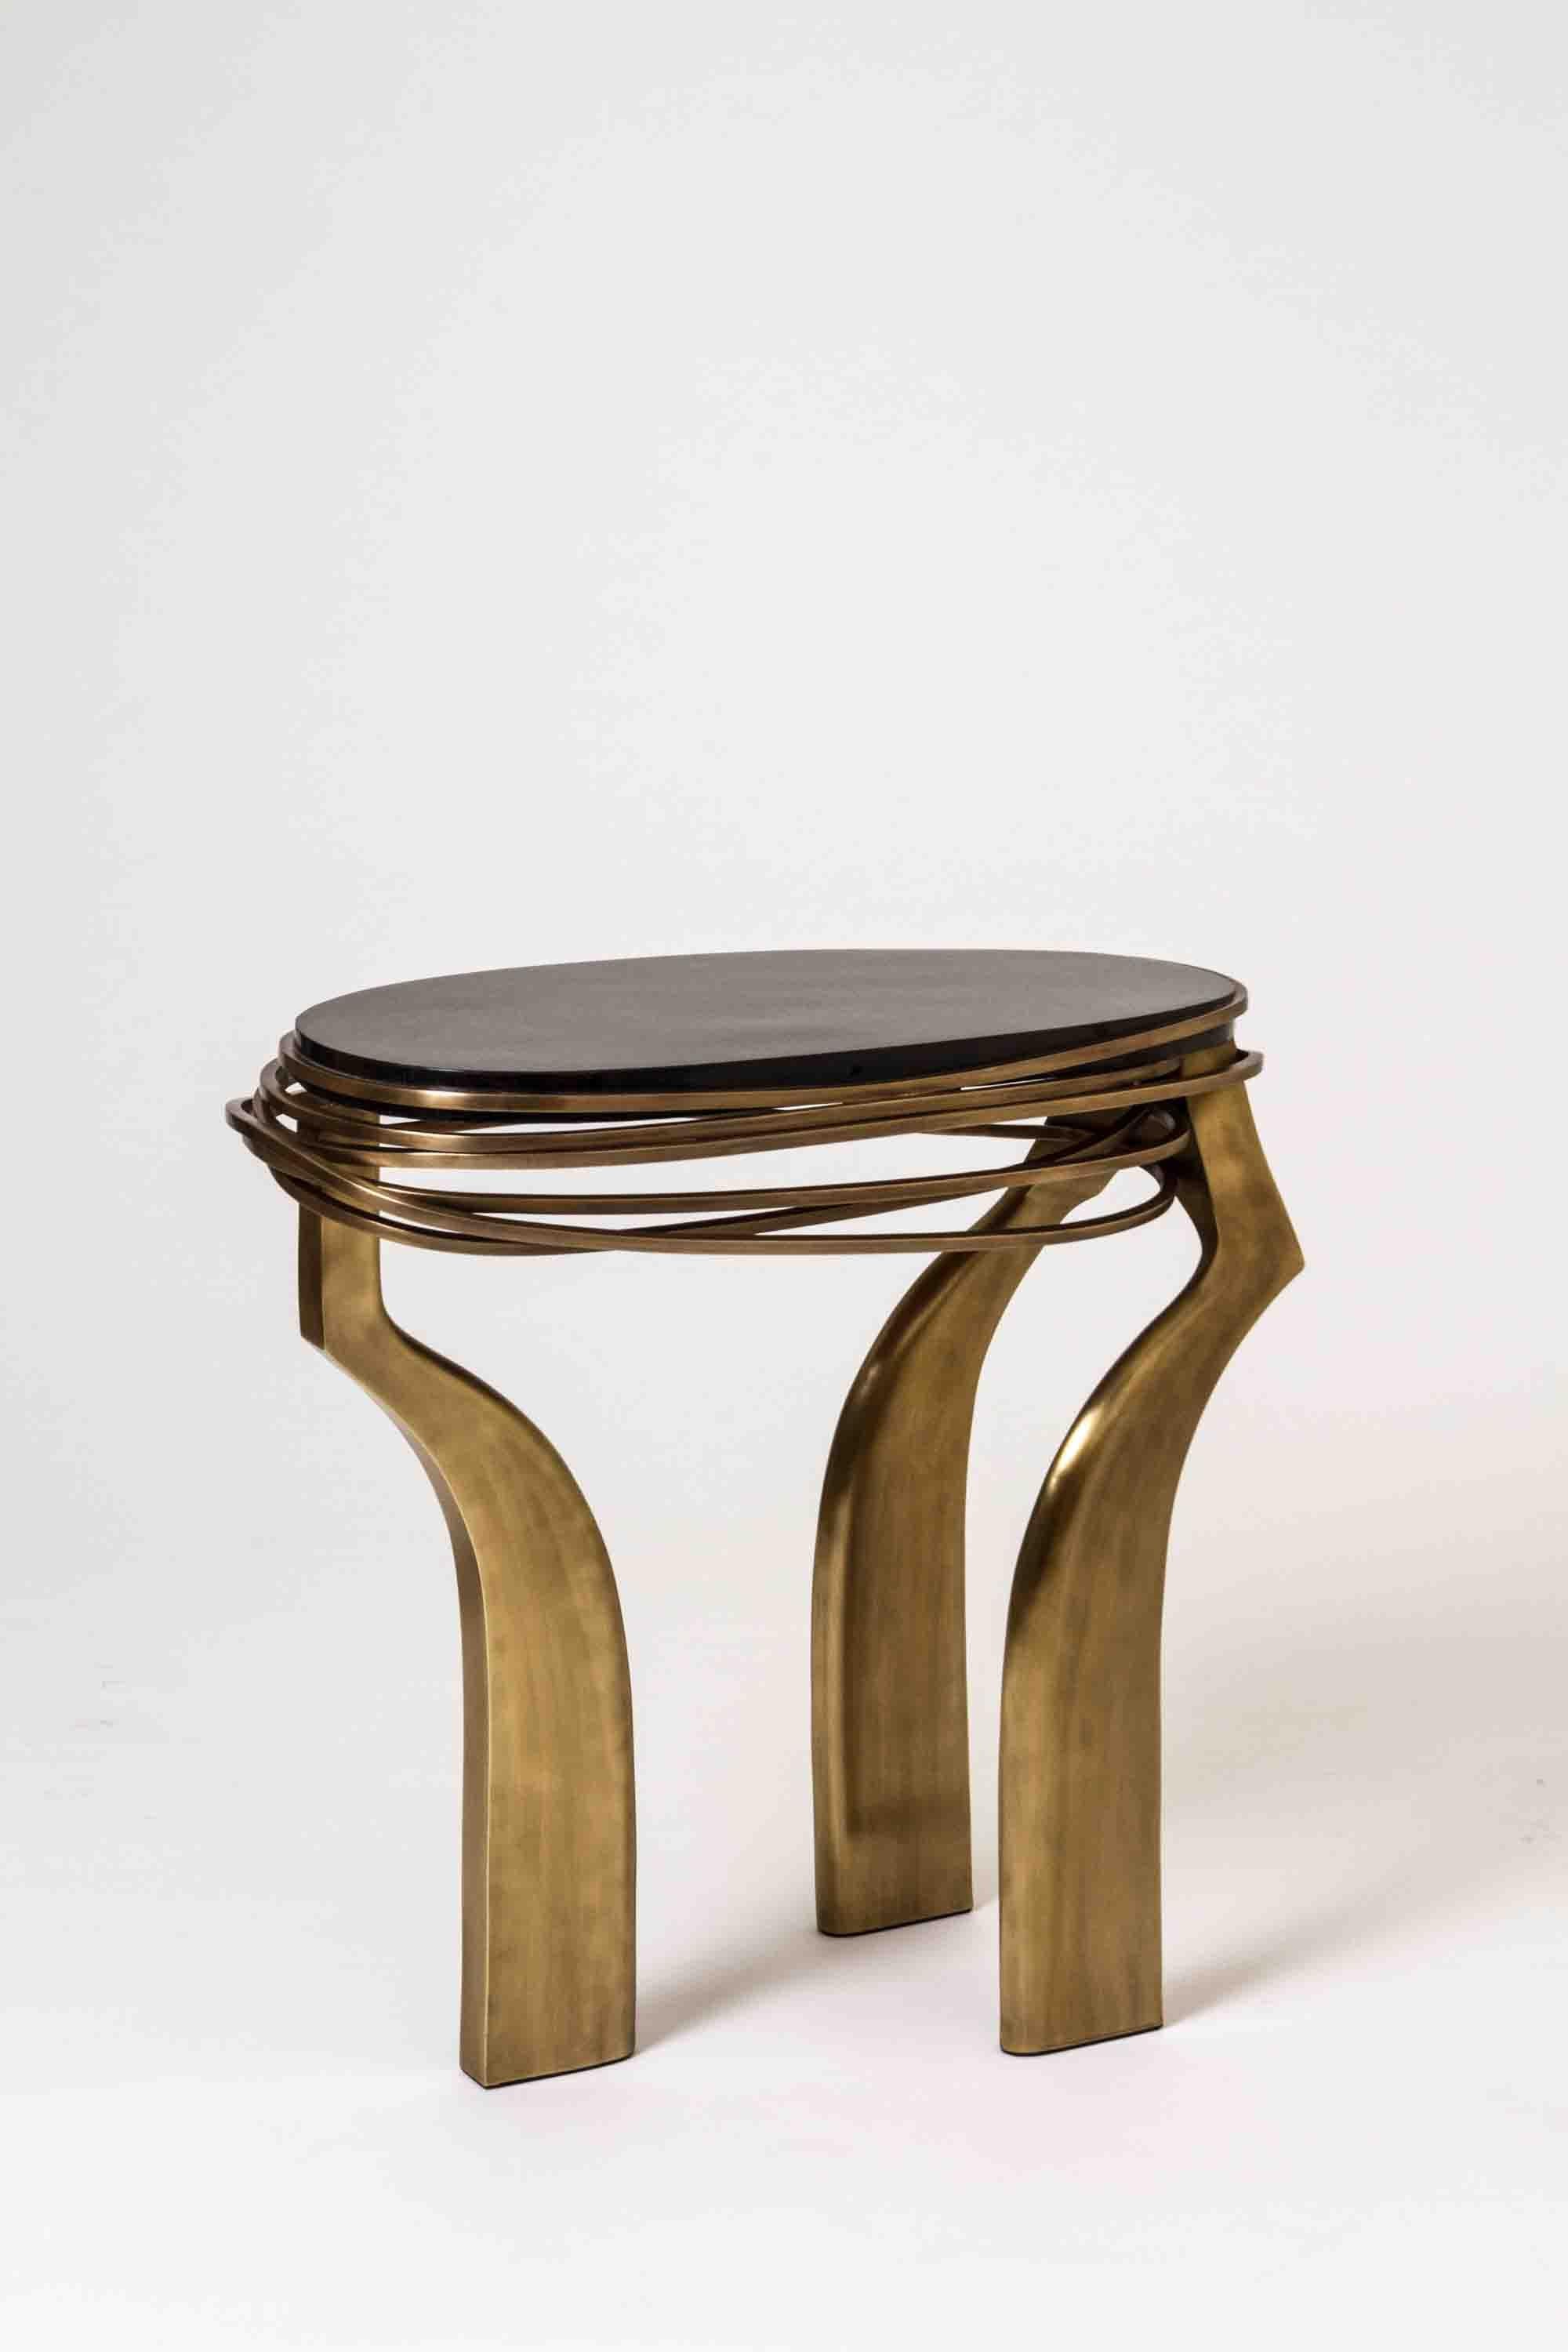 Shagreen Side Table with Sculptural Bronze-Patina Brass Details by Kifu Paris In New Condition For Sale In New York, NY